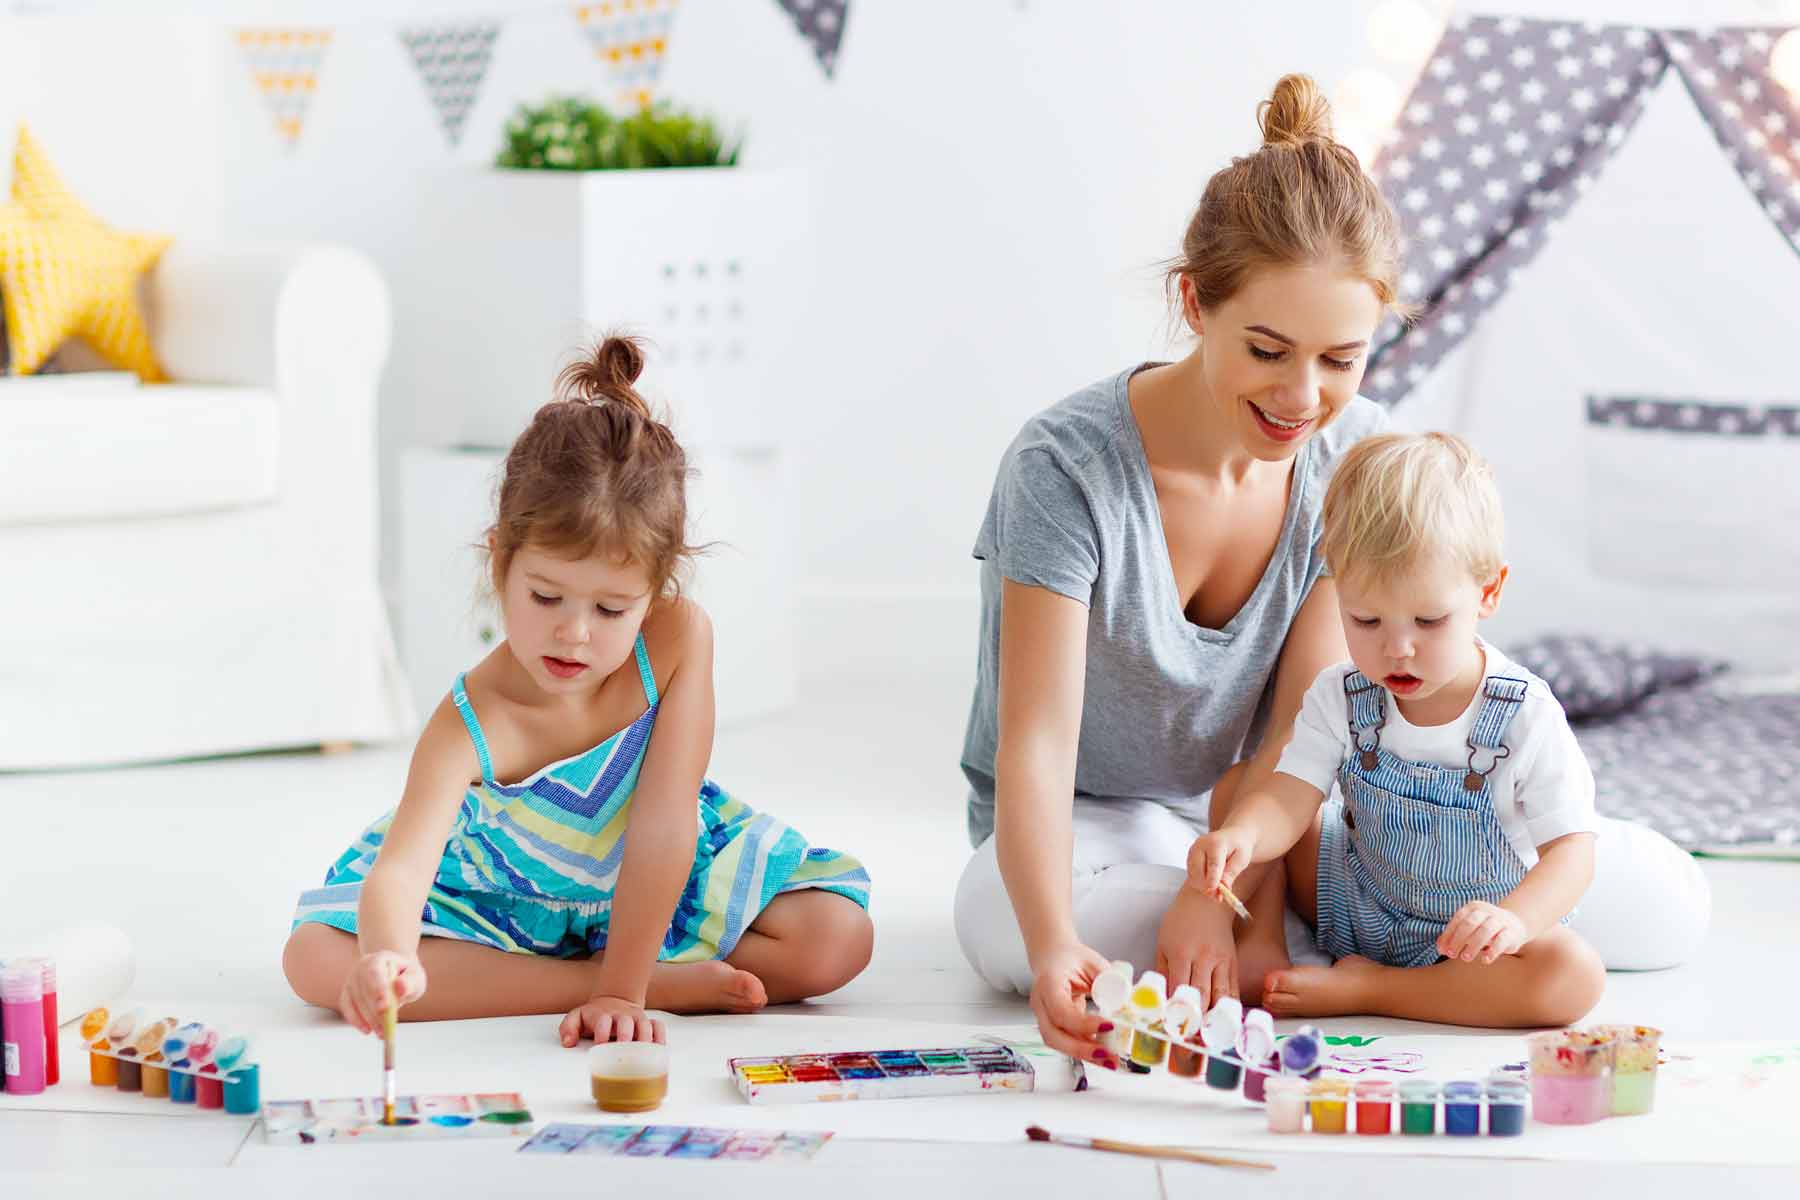 A babysitter working on arts and crafts with two young children.